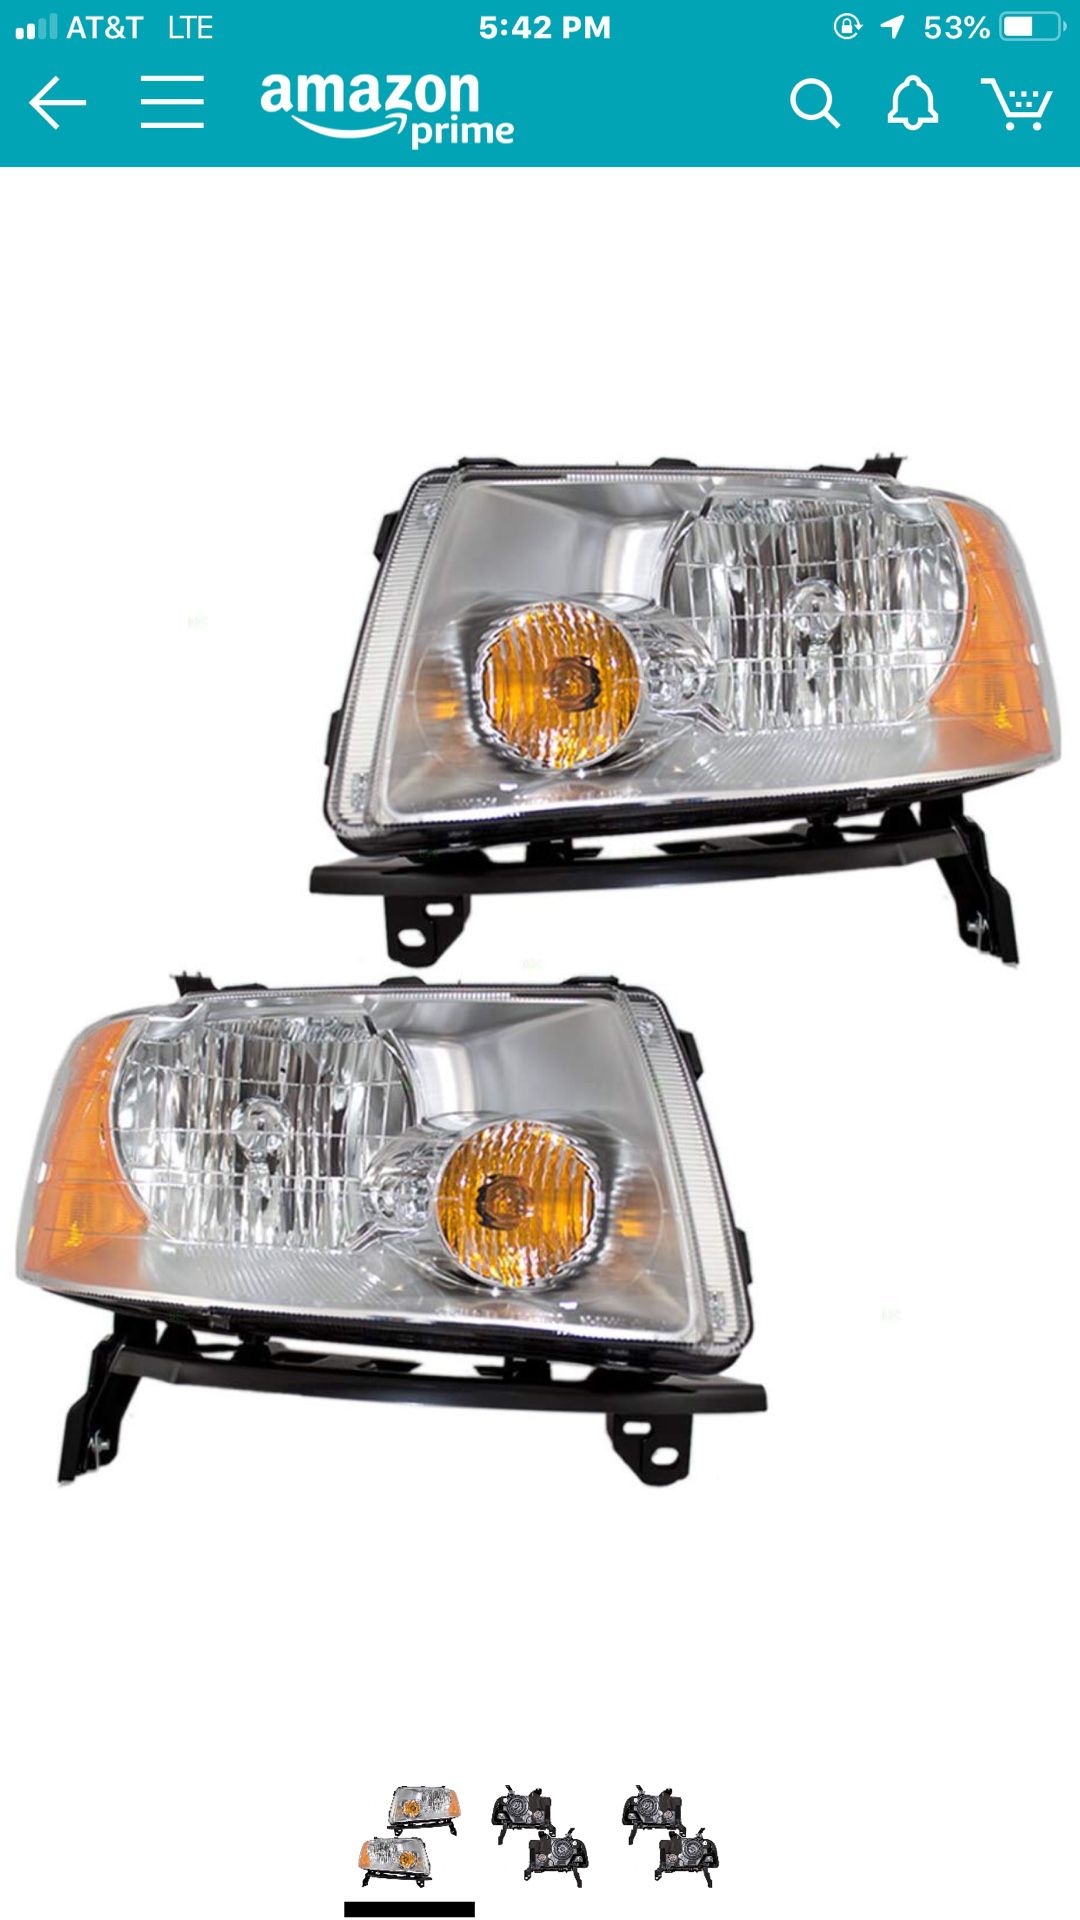 2005 Ford Freestyle headlight assembly’s set